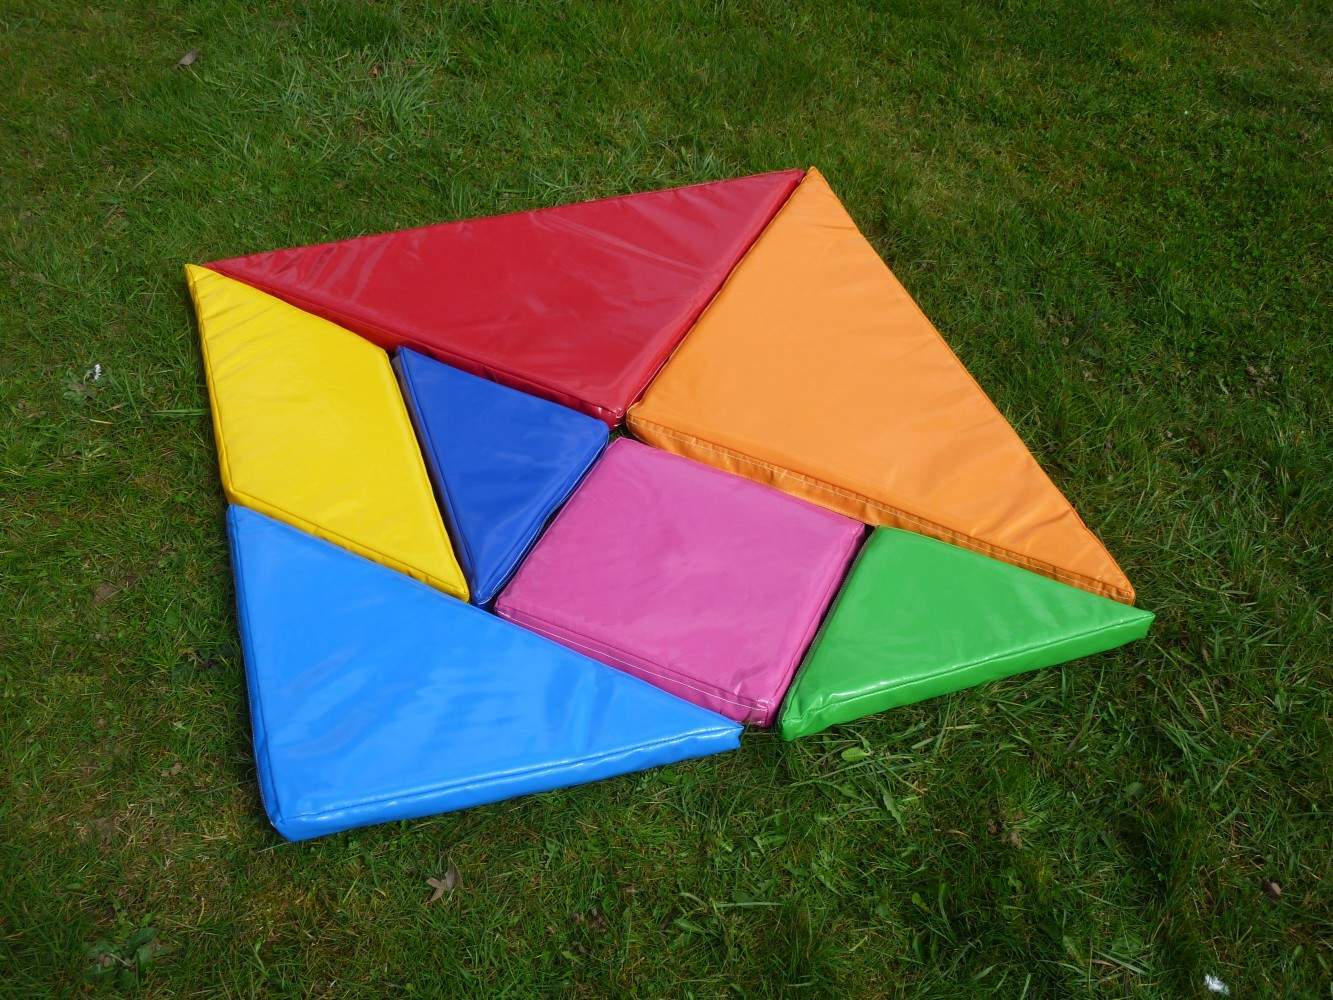 giant-tangram-puzzle-team-building-game-and-ice-breaker